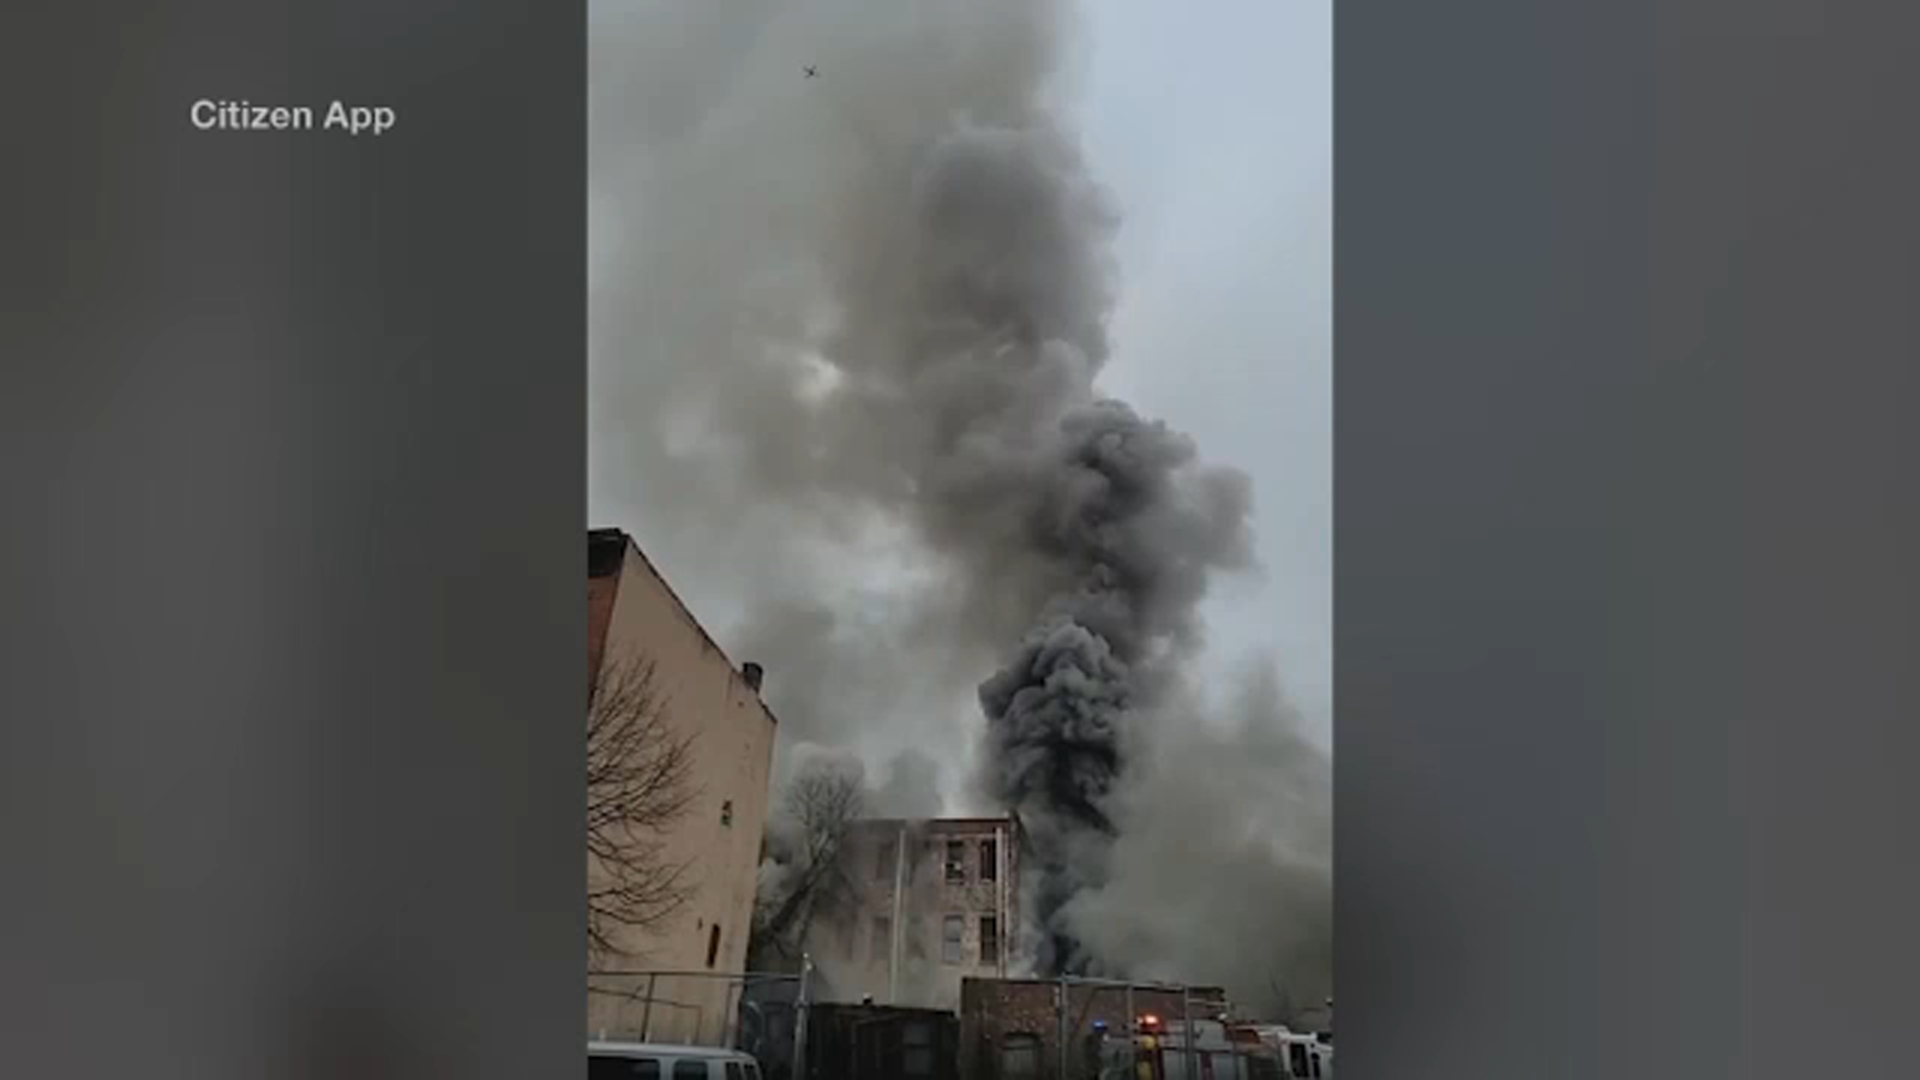 Heavy smoke from fire disrupting J and M service in Williamsburg, Brooklyn